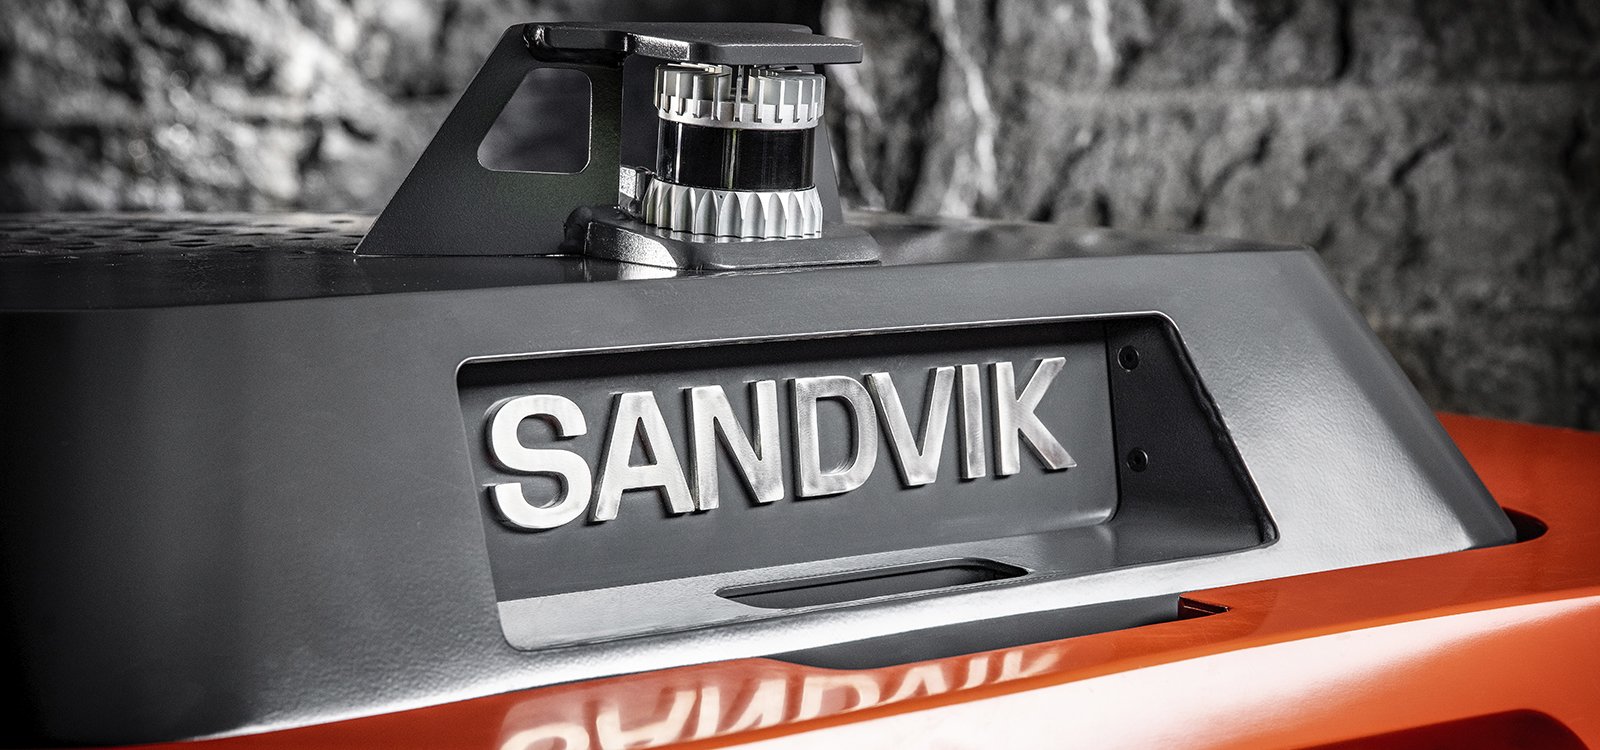 With the AutoMine Concept vehicle Sandvik aims to set the benchmark for future generations of autonomous mining operations.<span class=